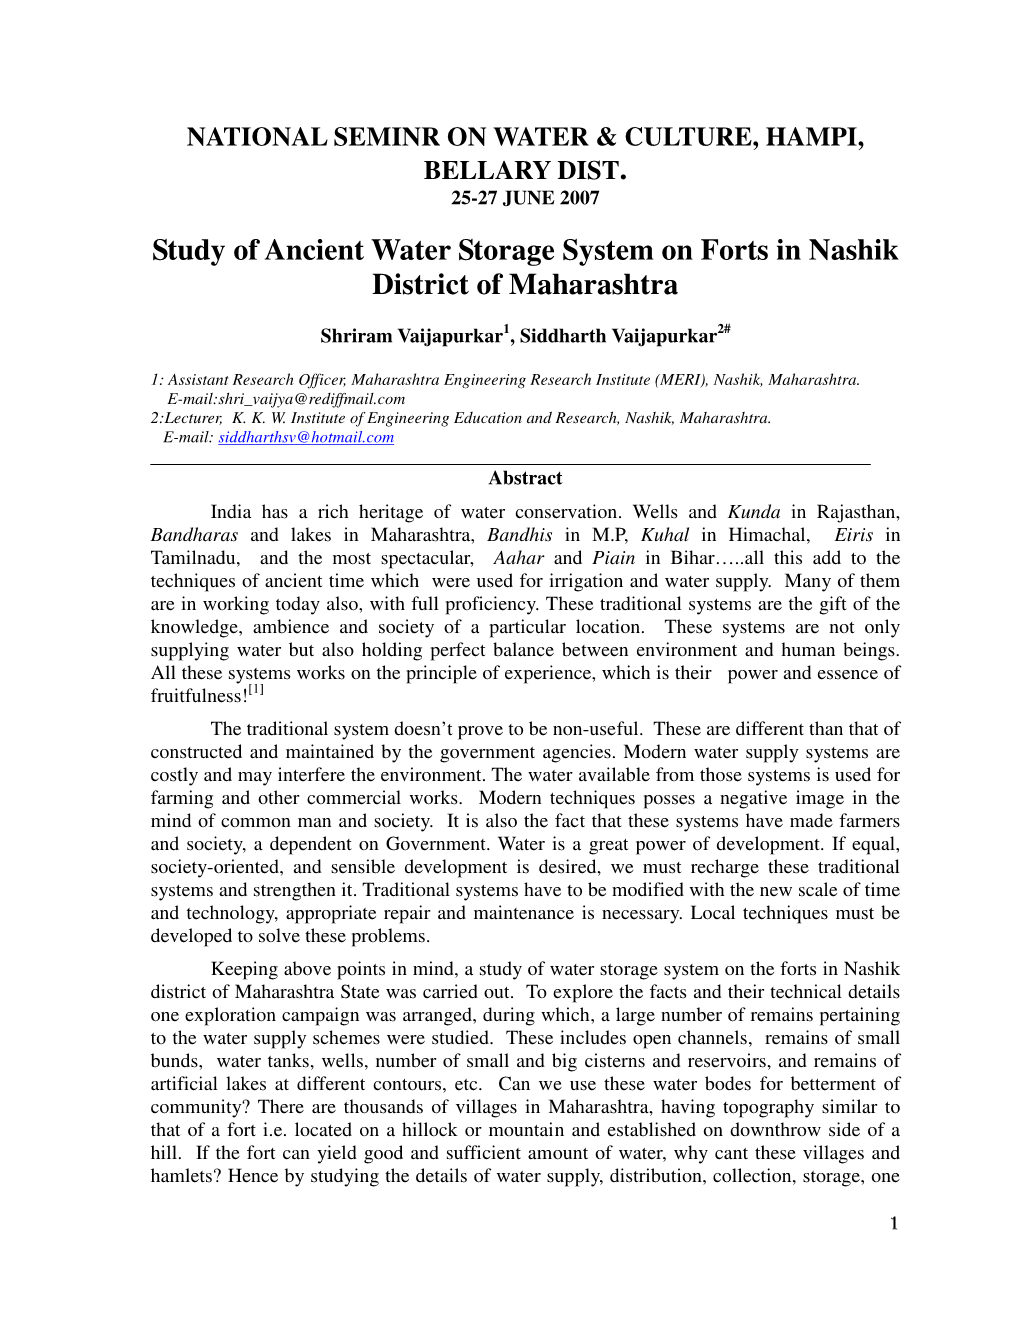 Study of Ancient Water Storage System on Forts in Nashik District of Maharashtra